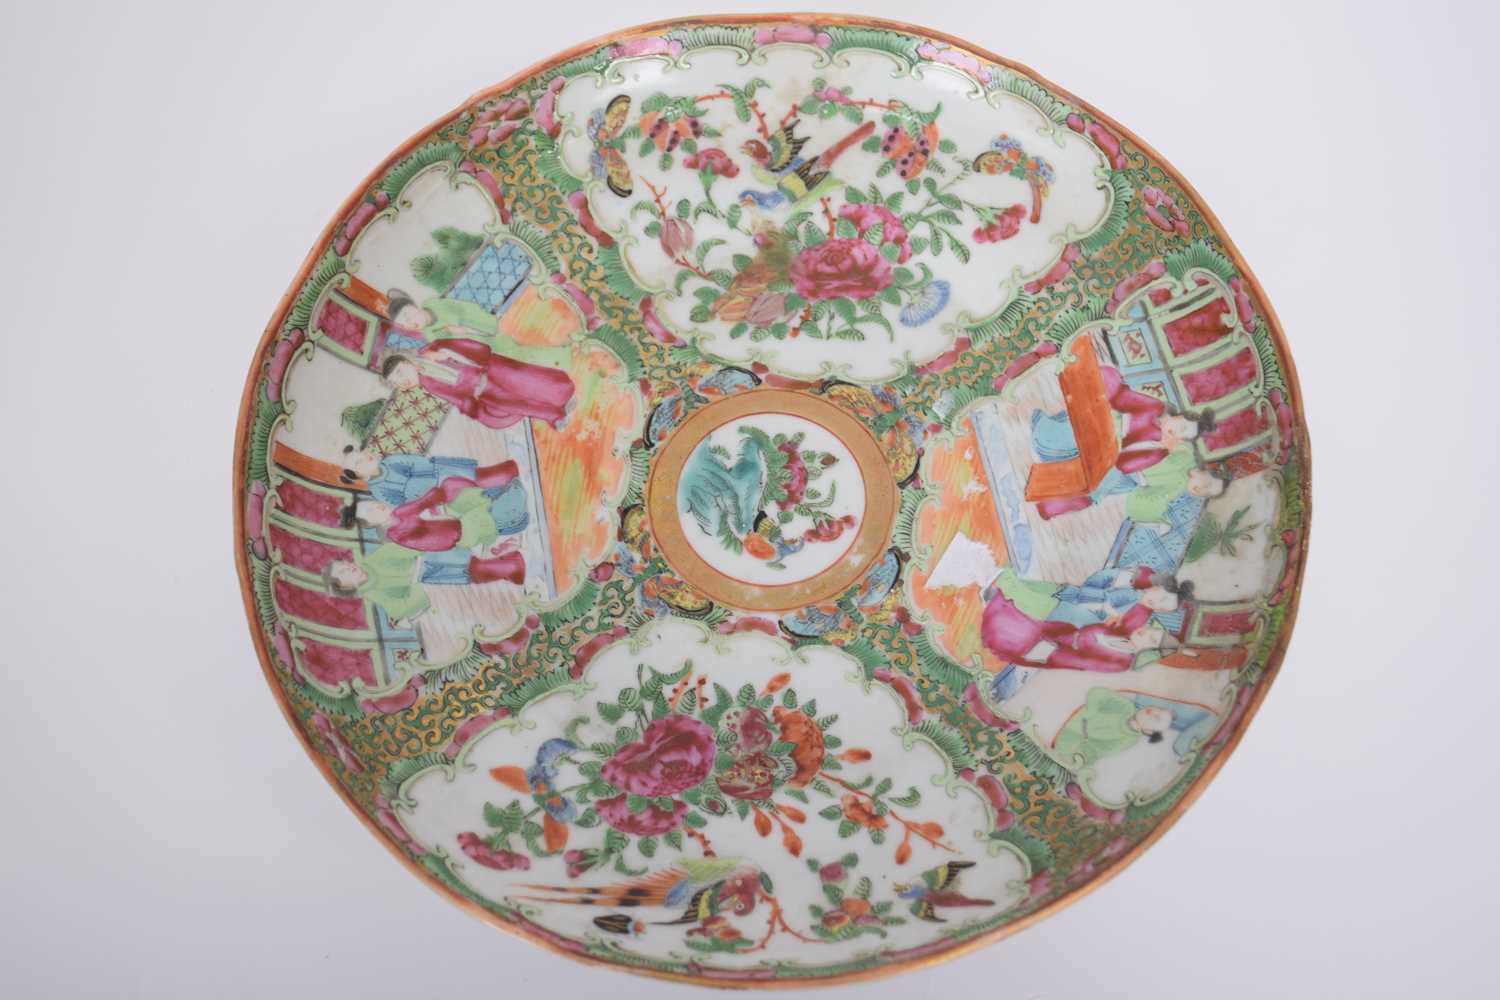 Cantonese porcelain tazza with typical designs of panels, figures, alternating with panels of - Image 7 of 8